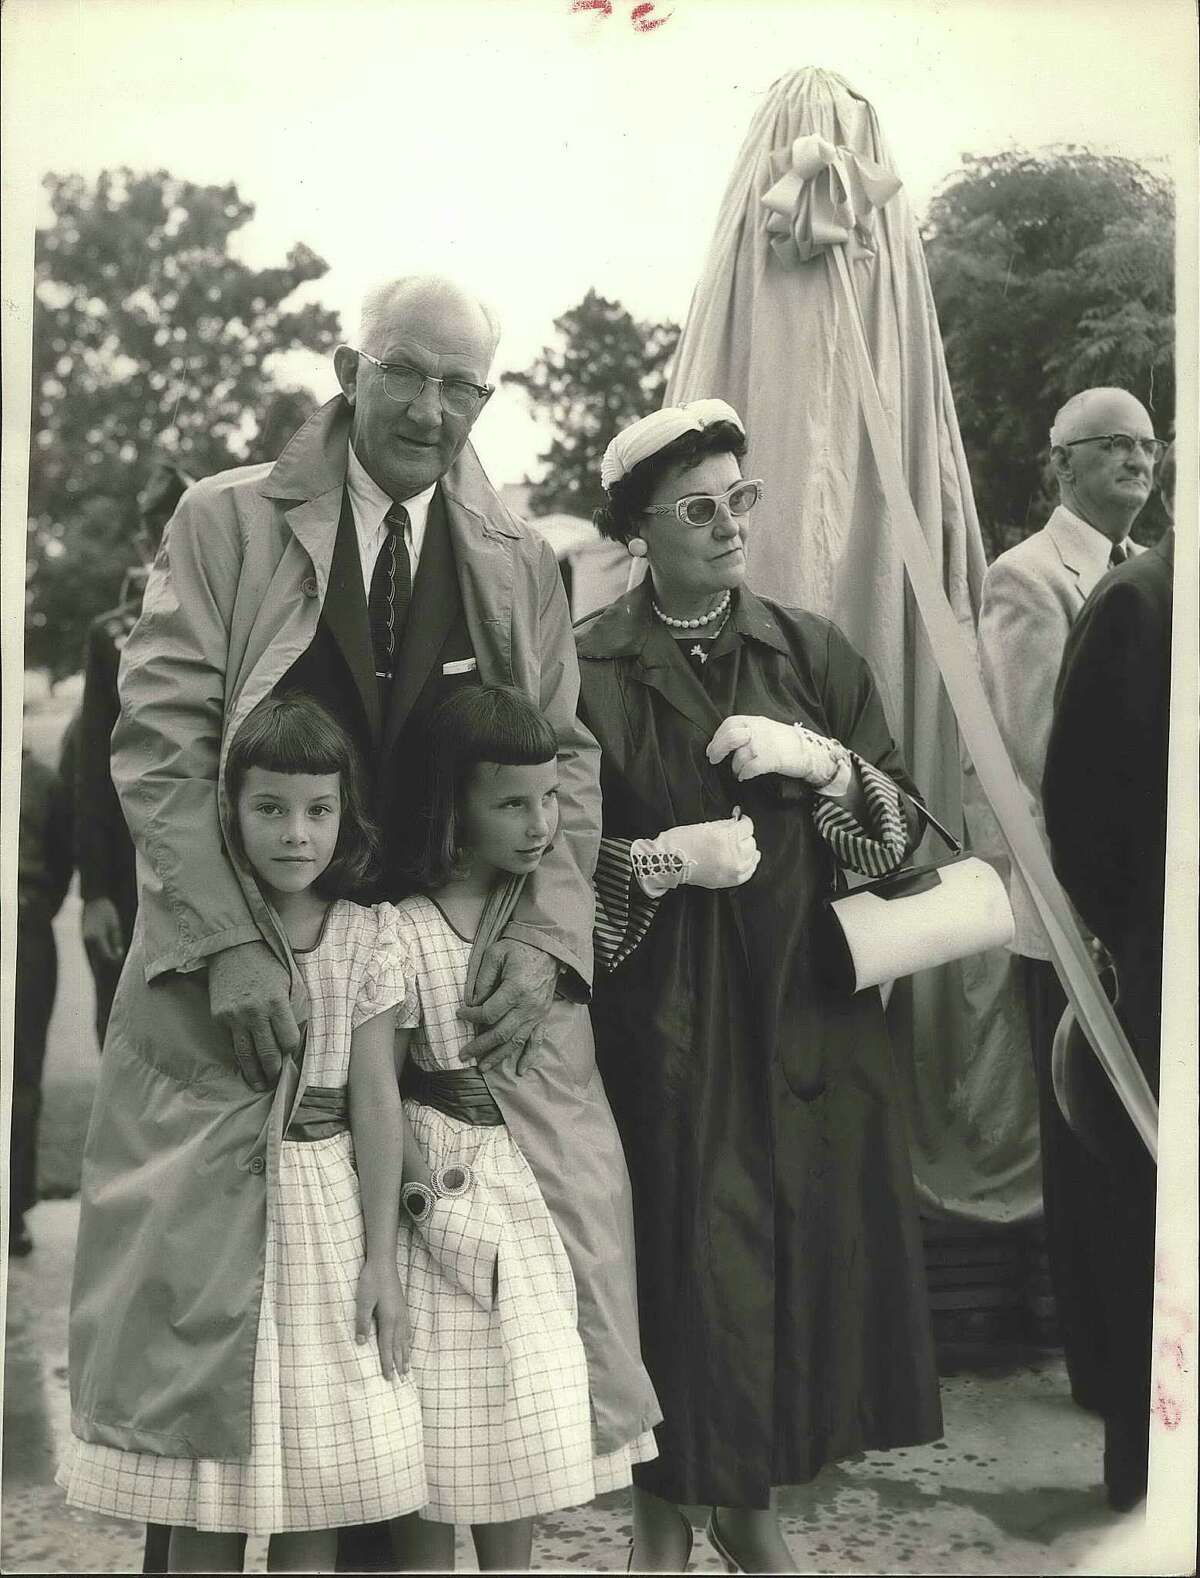 George Strake and his family helping dedicate the "Joe Roughneck" statue on June 5. 1957.